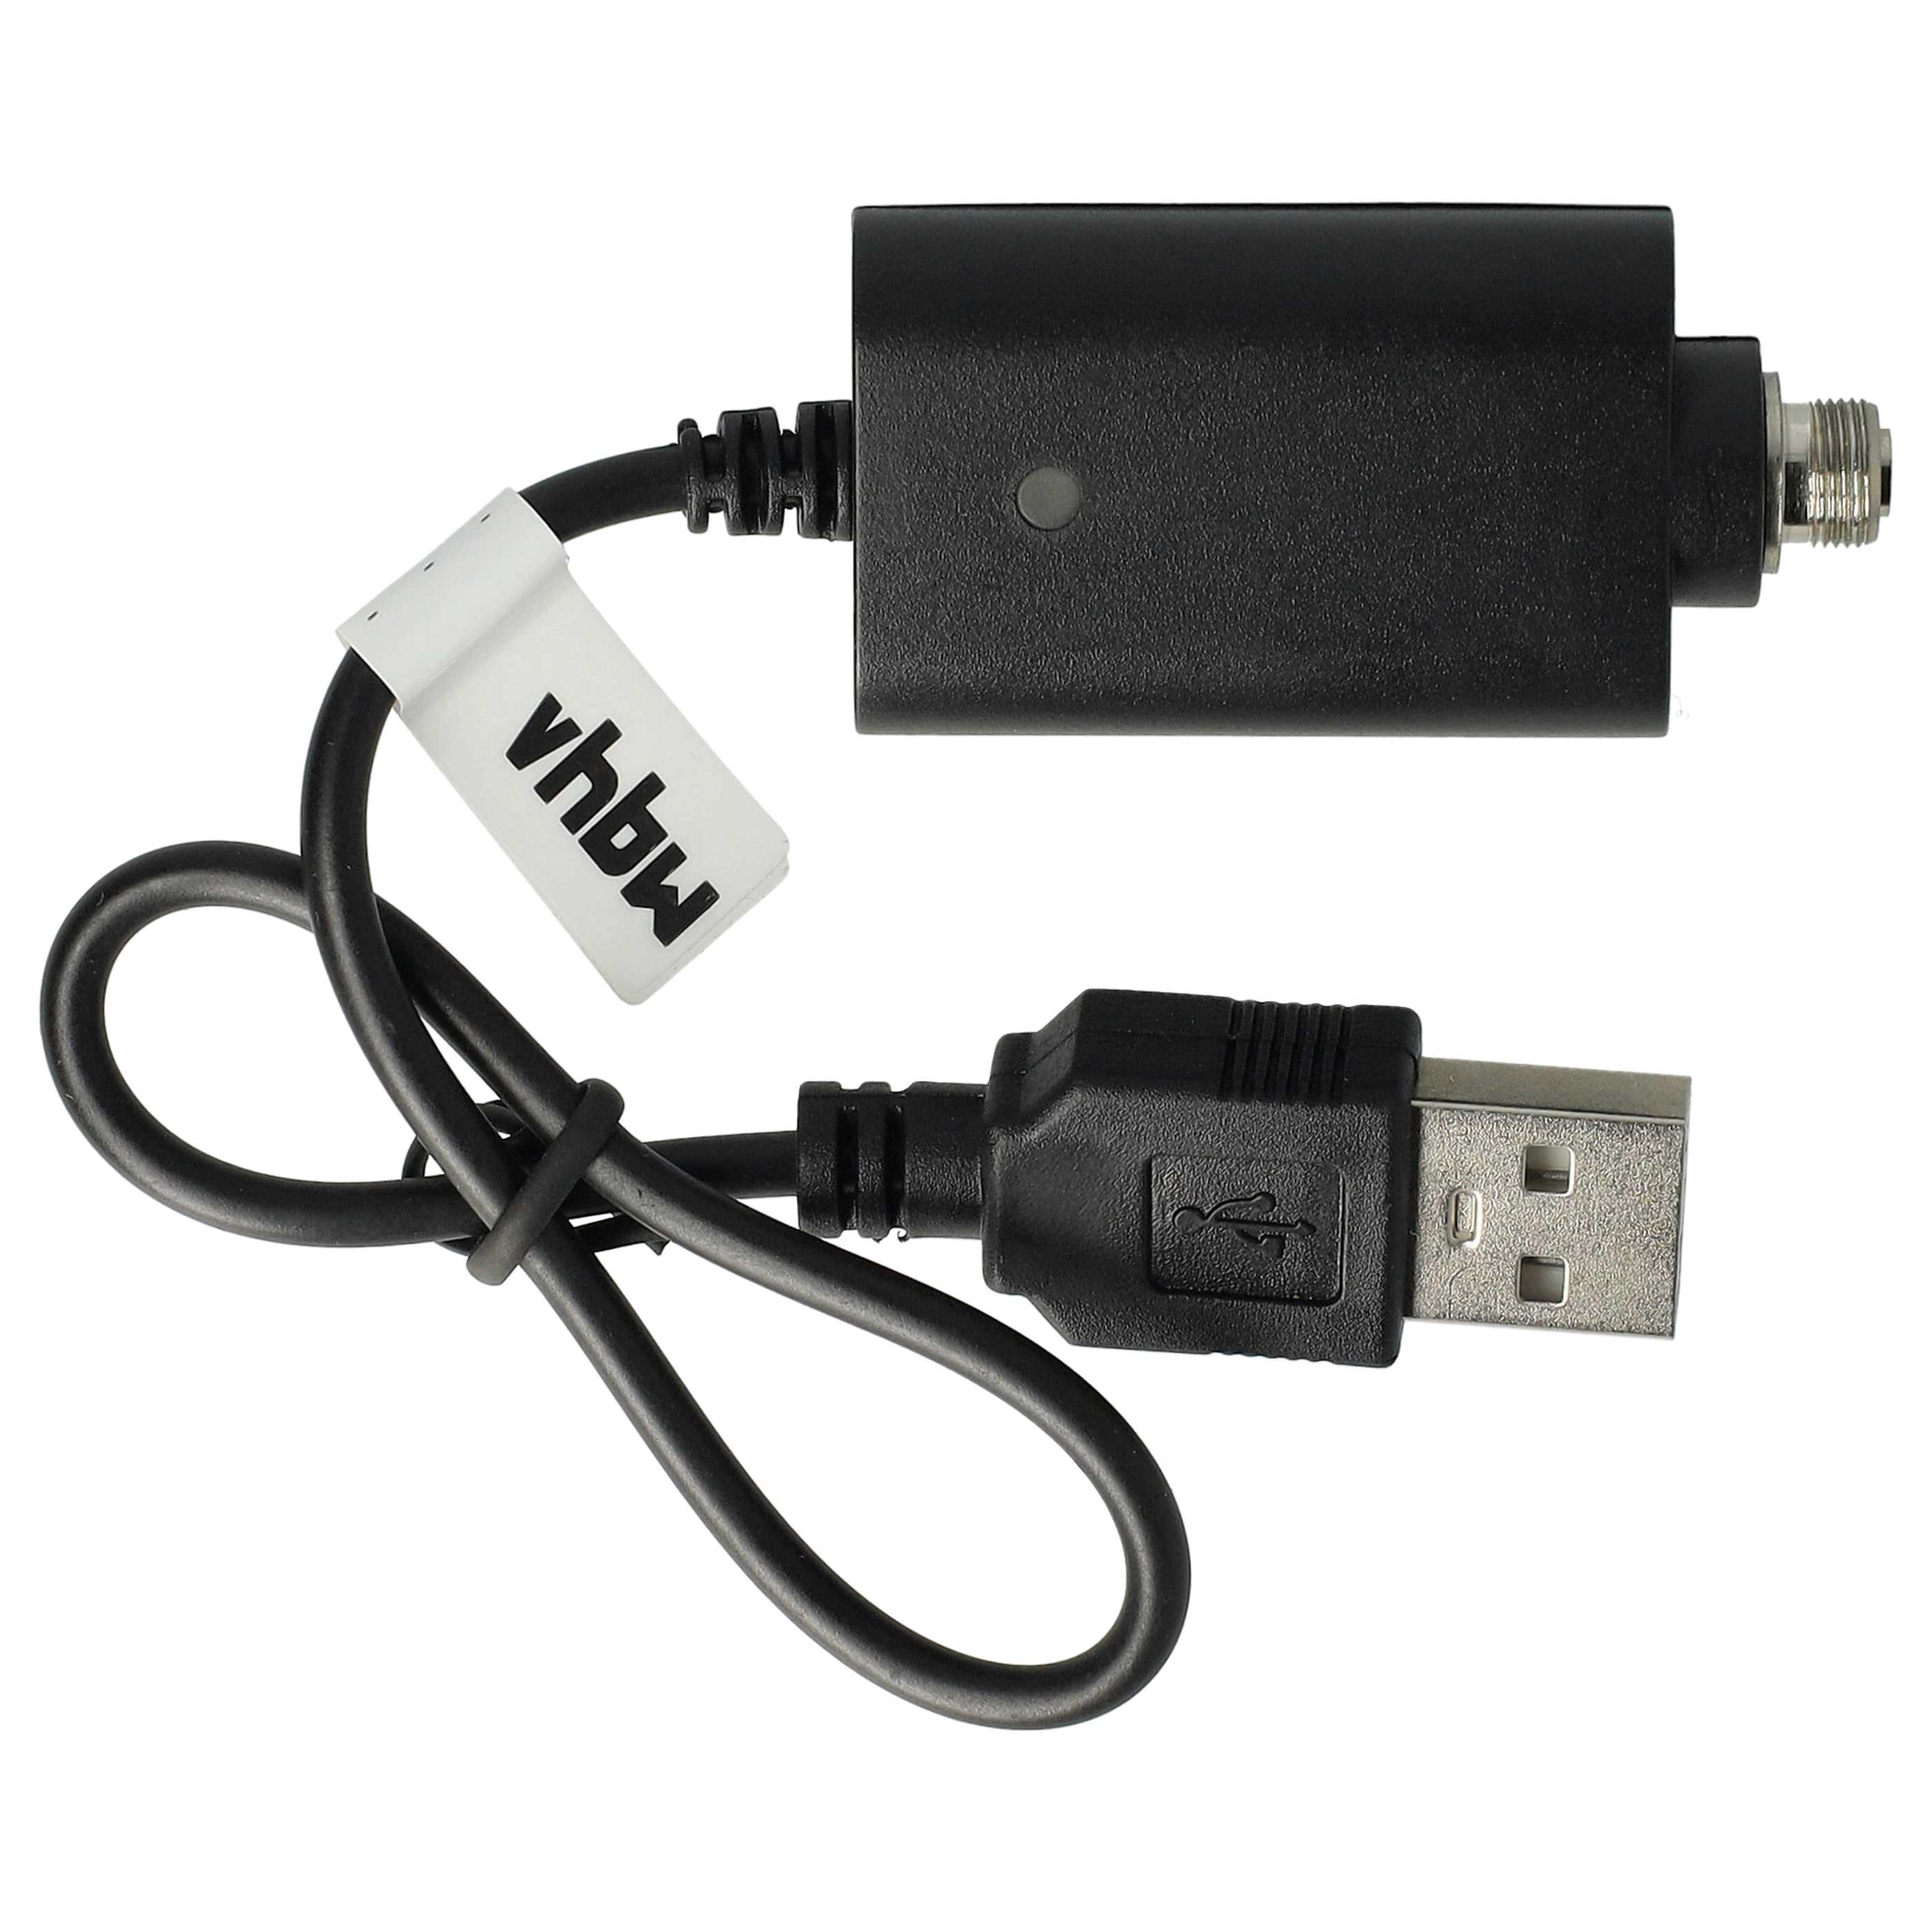 vhbw USB Charger compatible with various E-Cigarettes, E-Shisha Devices wtih Screw Thread - 25cm Cable